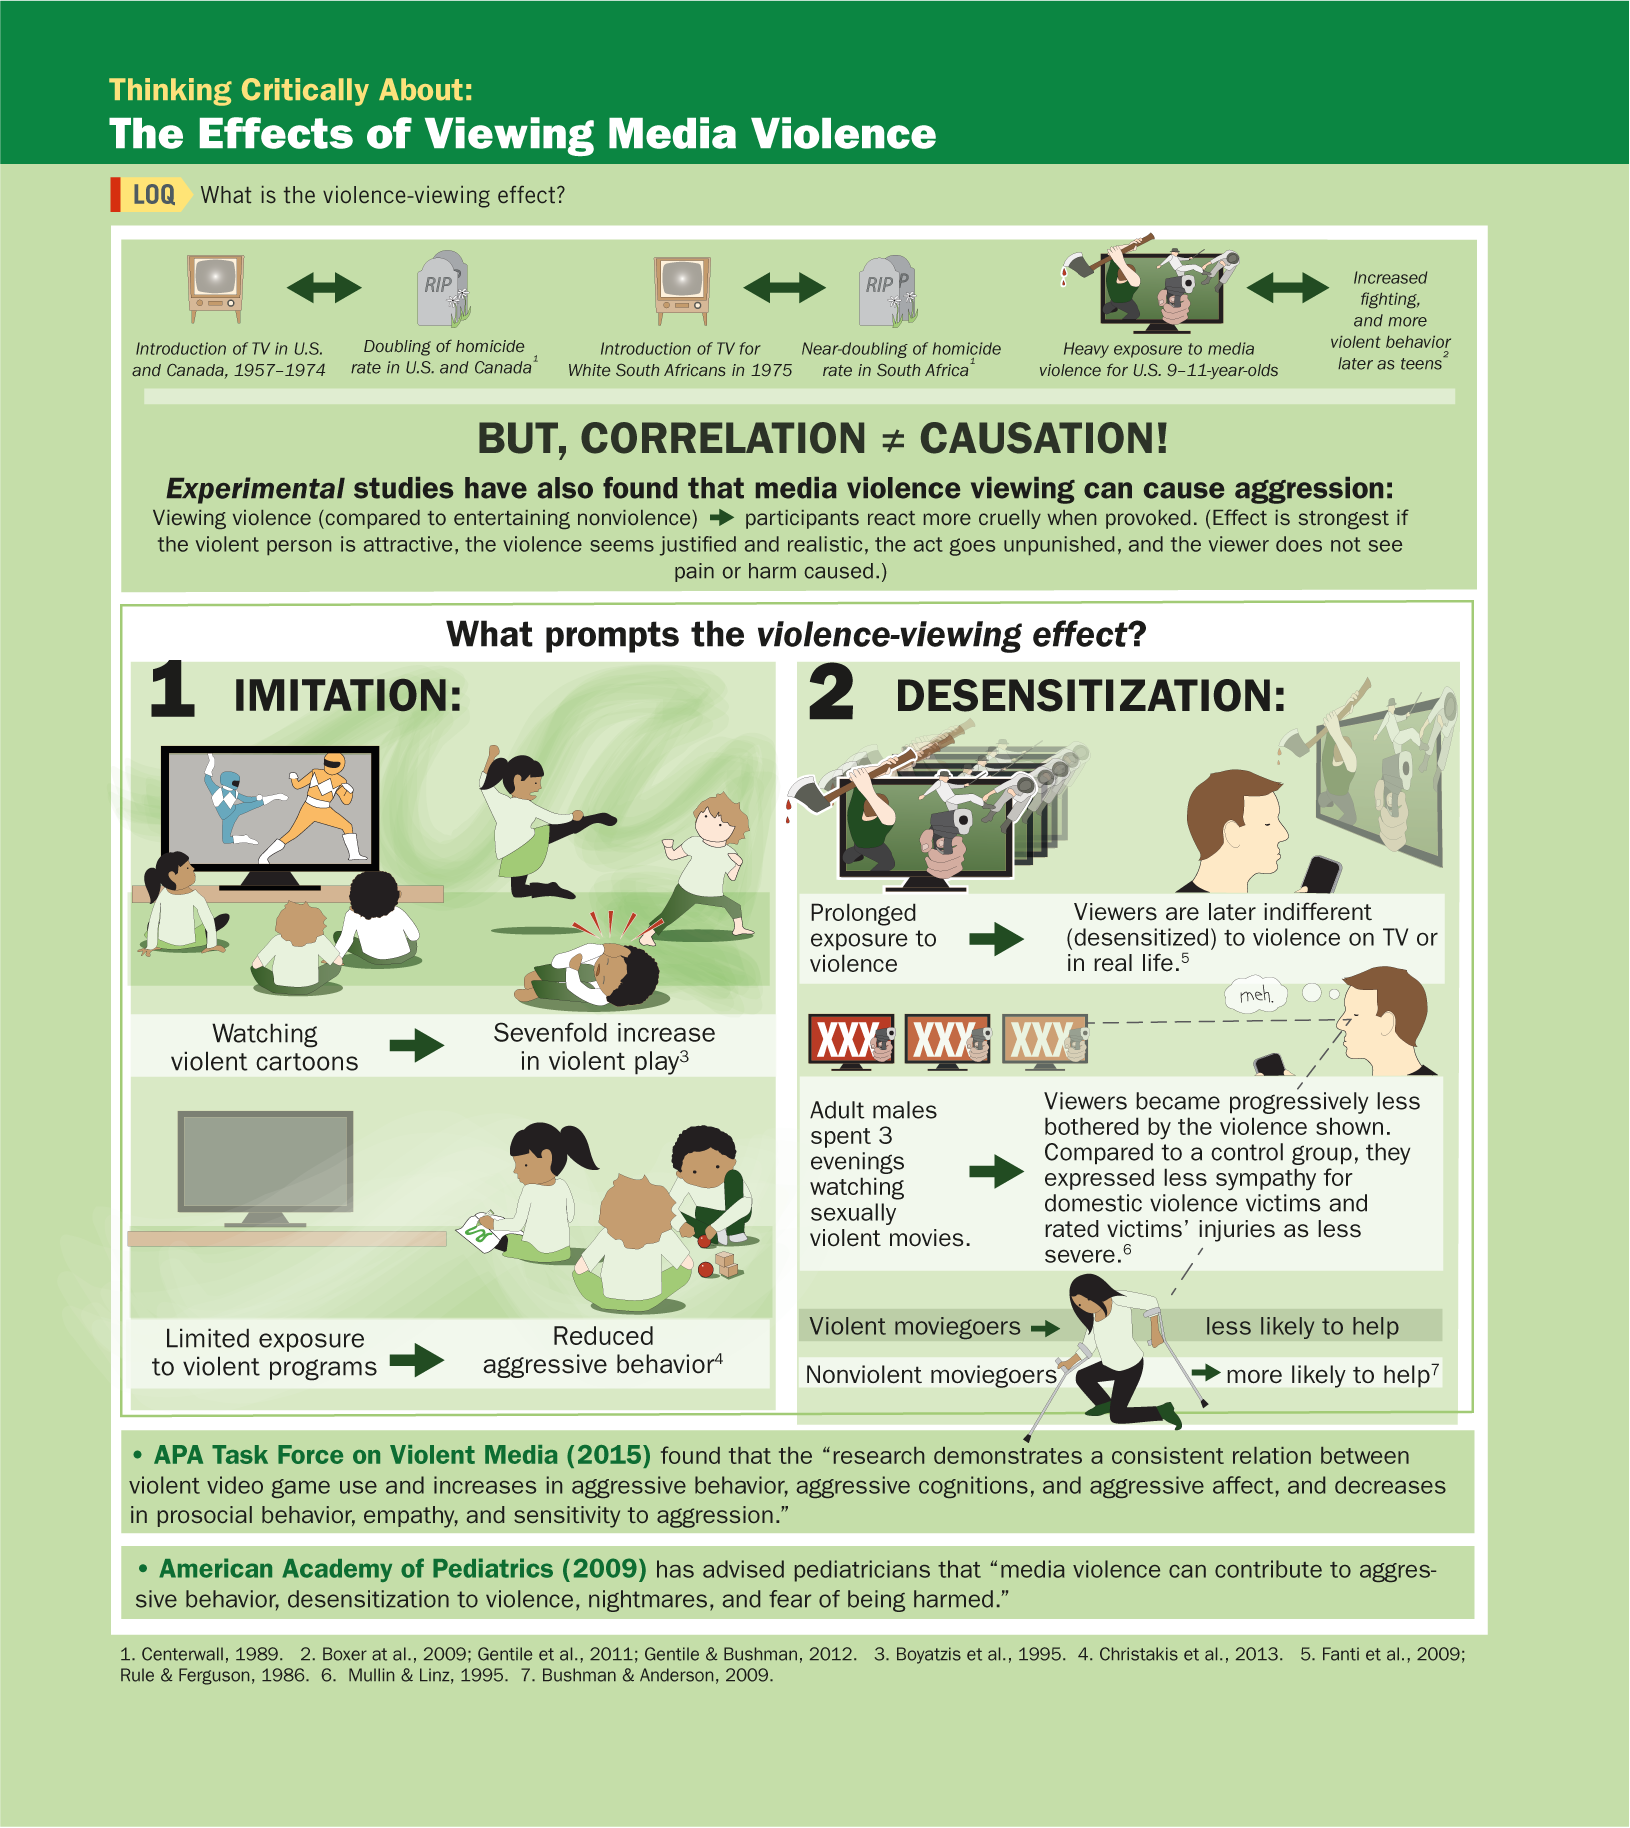 An illustration, titled THINKING CRITICALLY ABOUT, explains the effects of viewing media violence, such as imitation and desensitization, influencing the aggressive behavior of a person. You can read full description from the link below